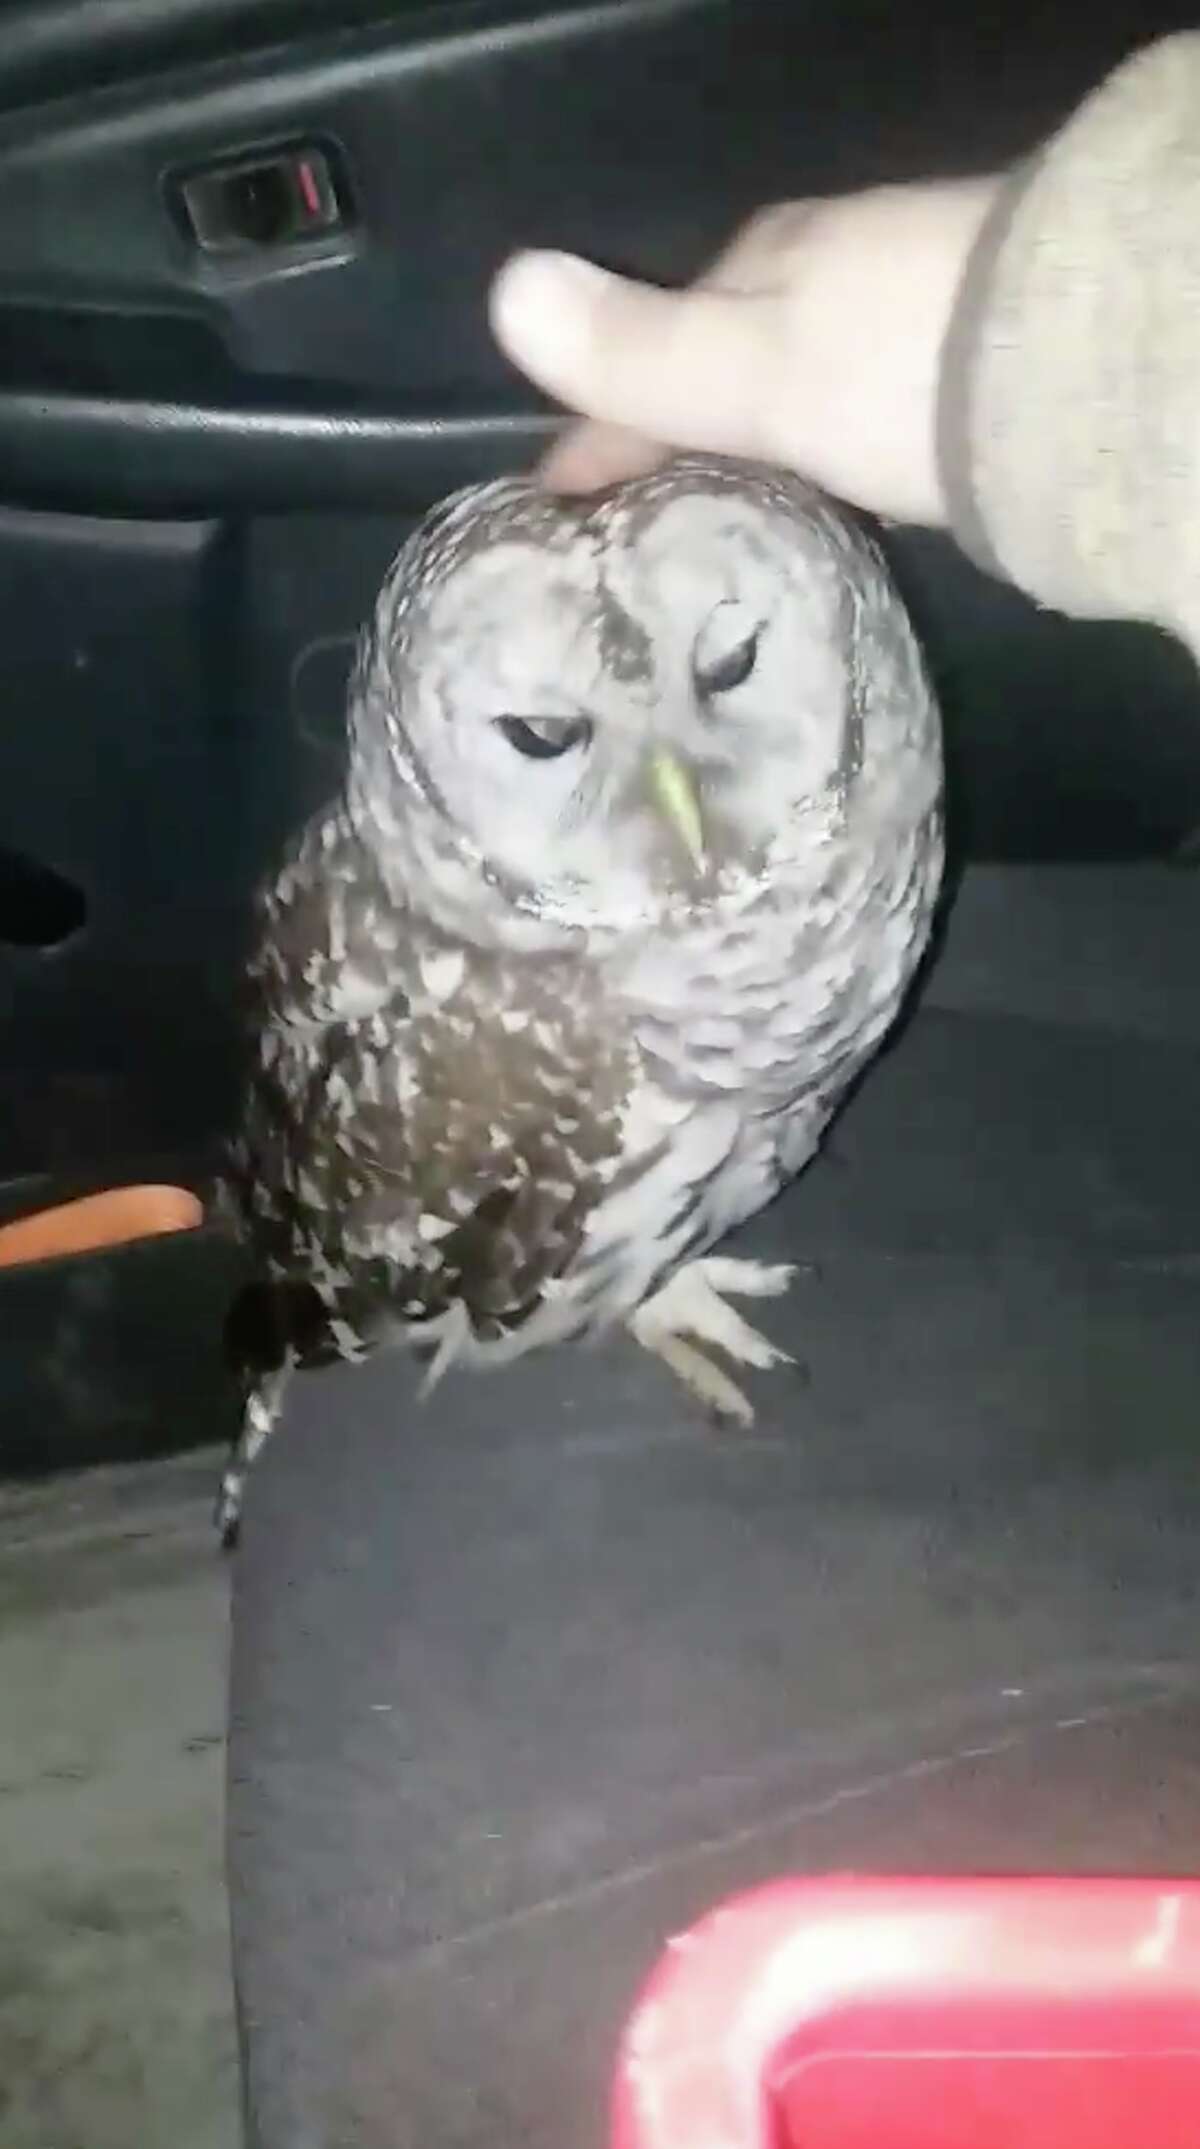 An owl flew through a moving pickup truck's window and into the driver's face on Jan. 2, 2019, in Averill Park, N.Y. The driver, Jeremy Dodge, suffered a few scrapes but the bird flew away, apparently uninjured.